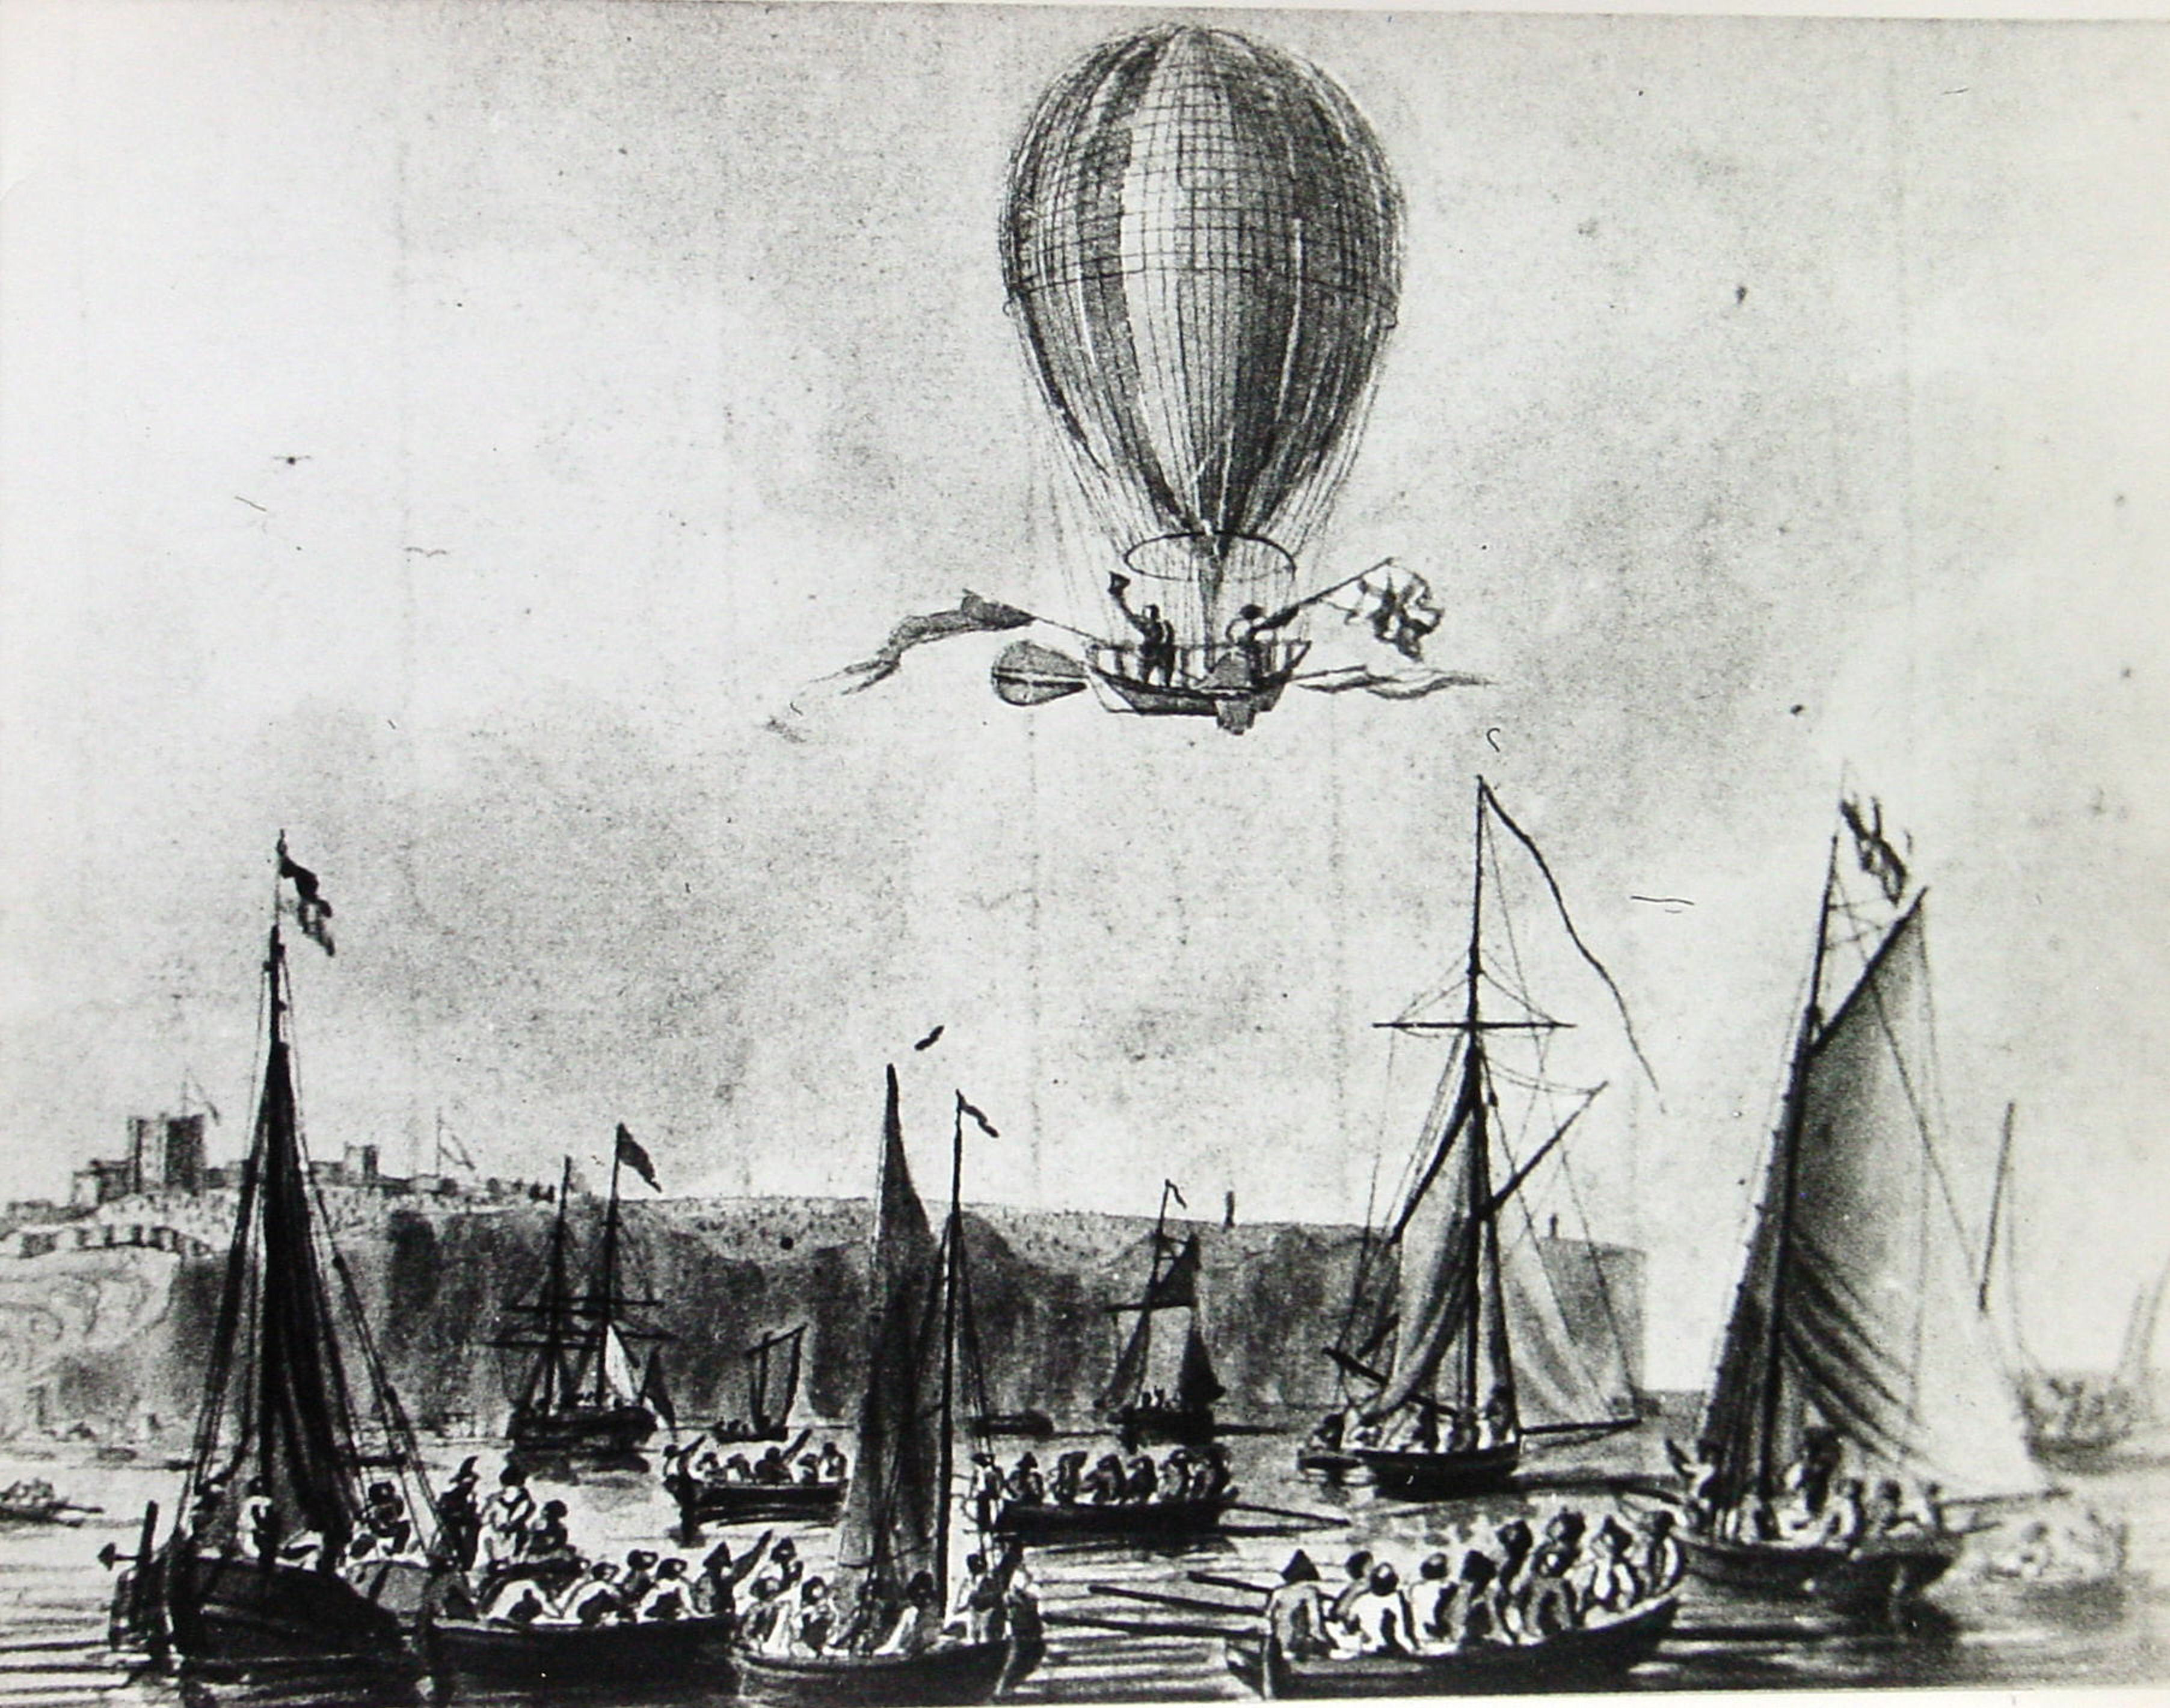 The first people to cross the English Channel by air